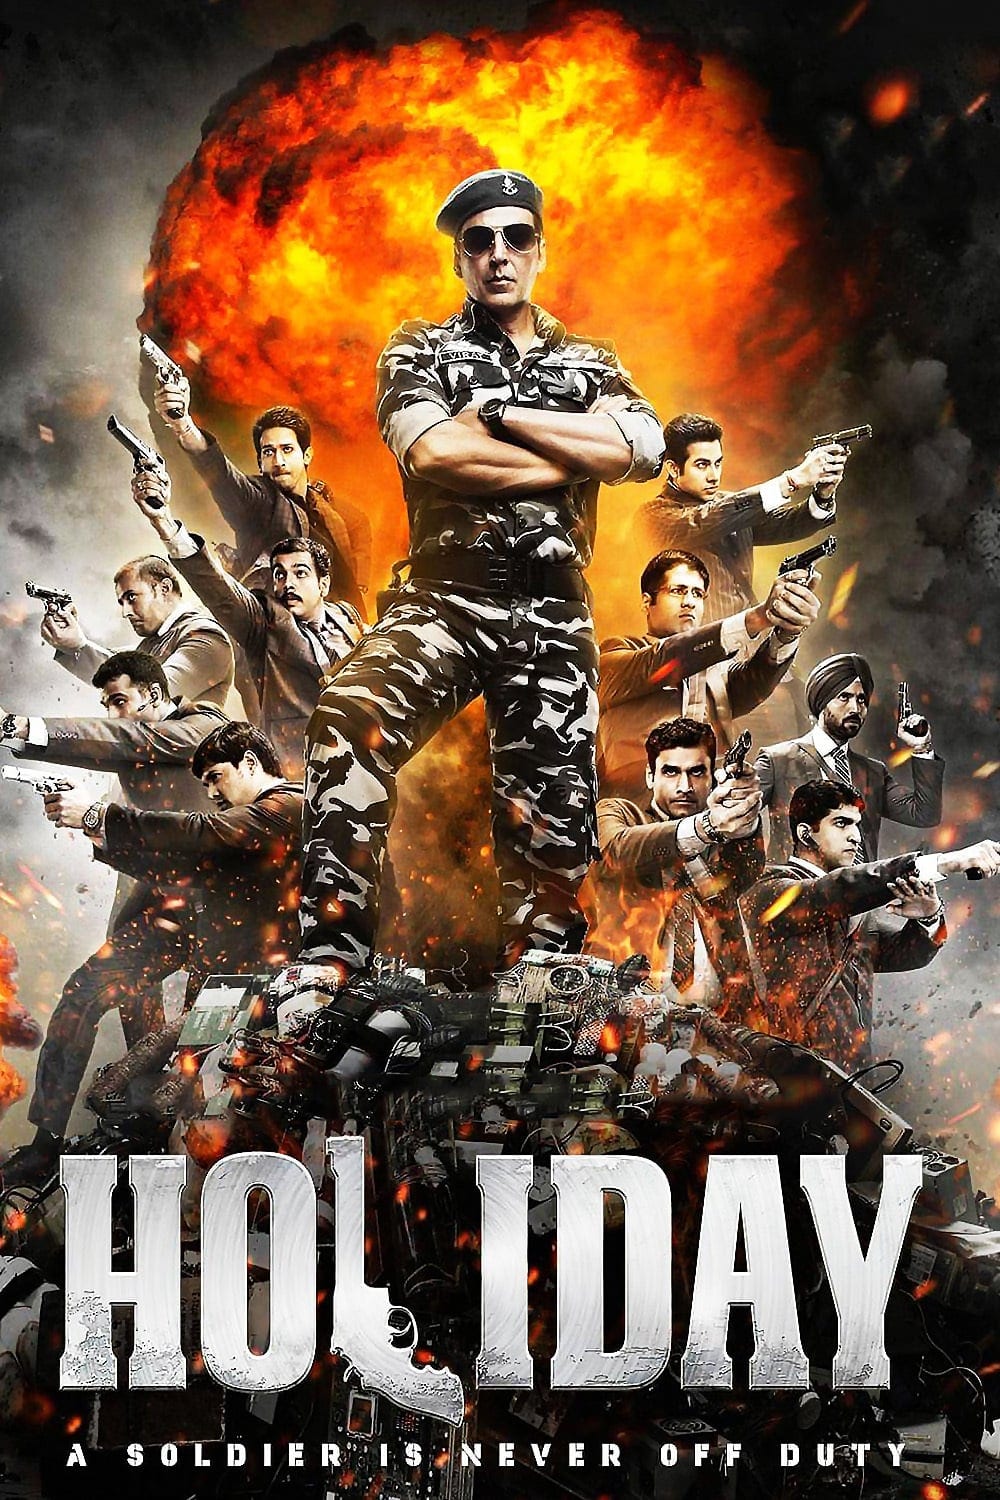 Poster for the movie "Holiday"